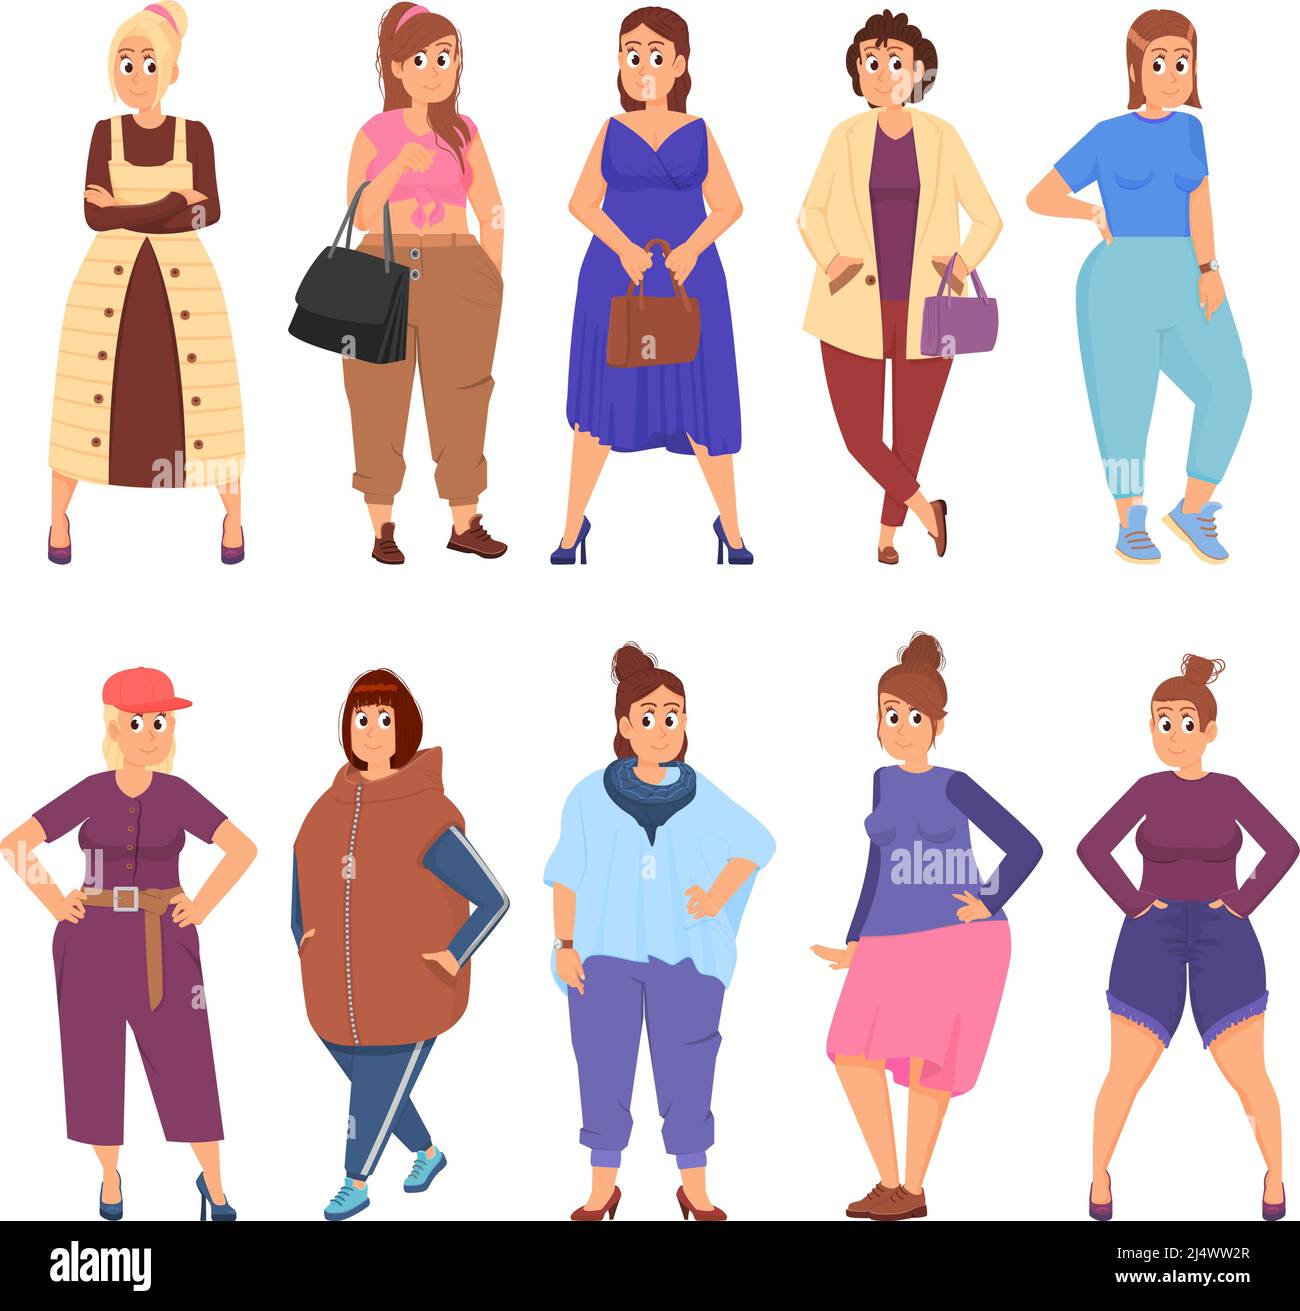 Chubby Fat Girls Overweight Cut Out Stock Images And Pictures Alamy